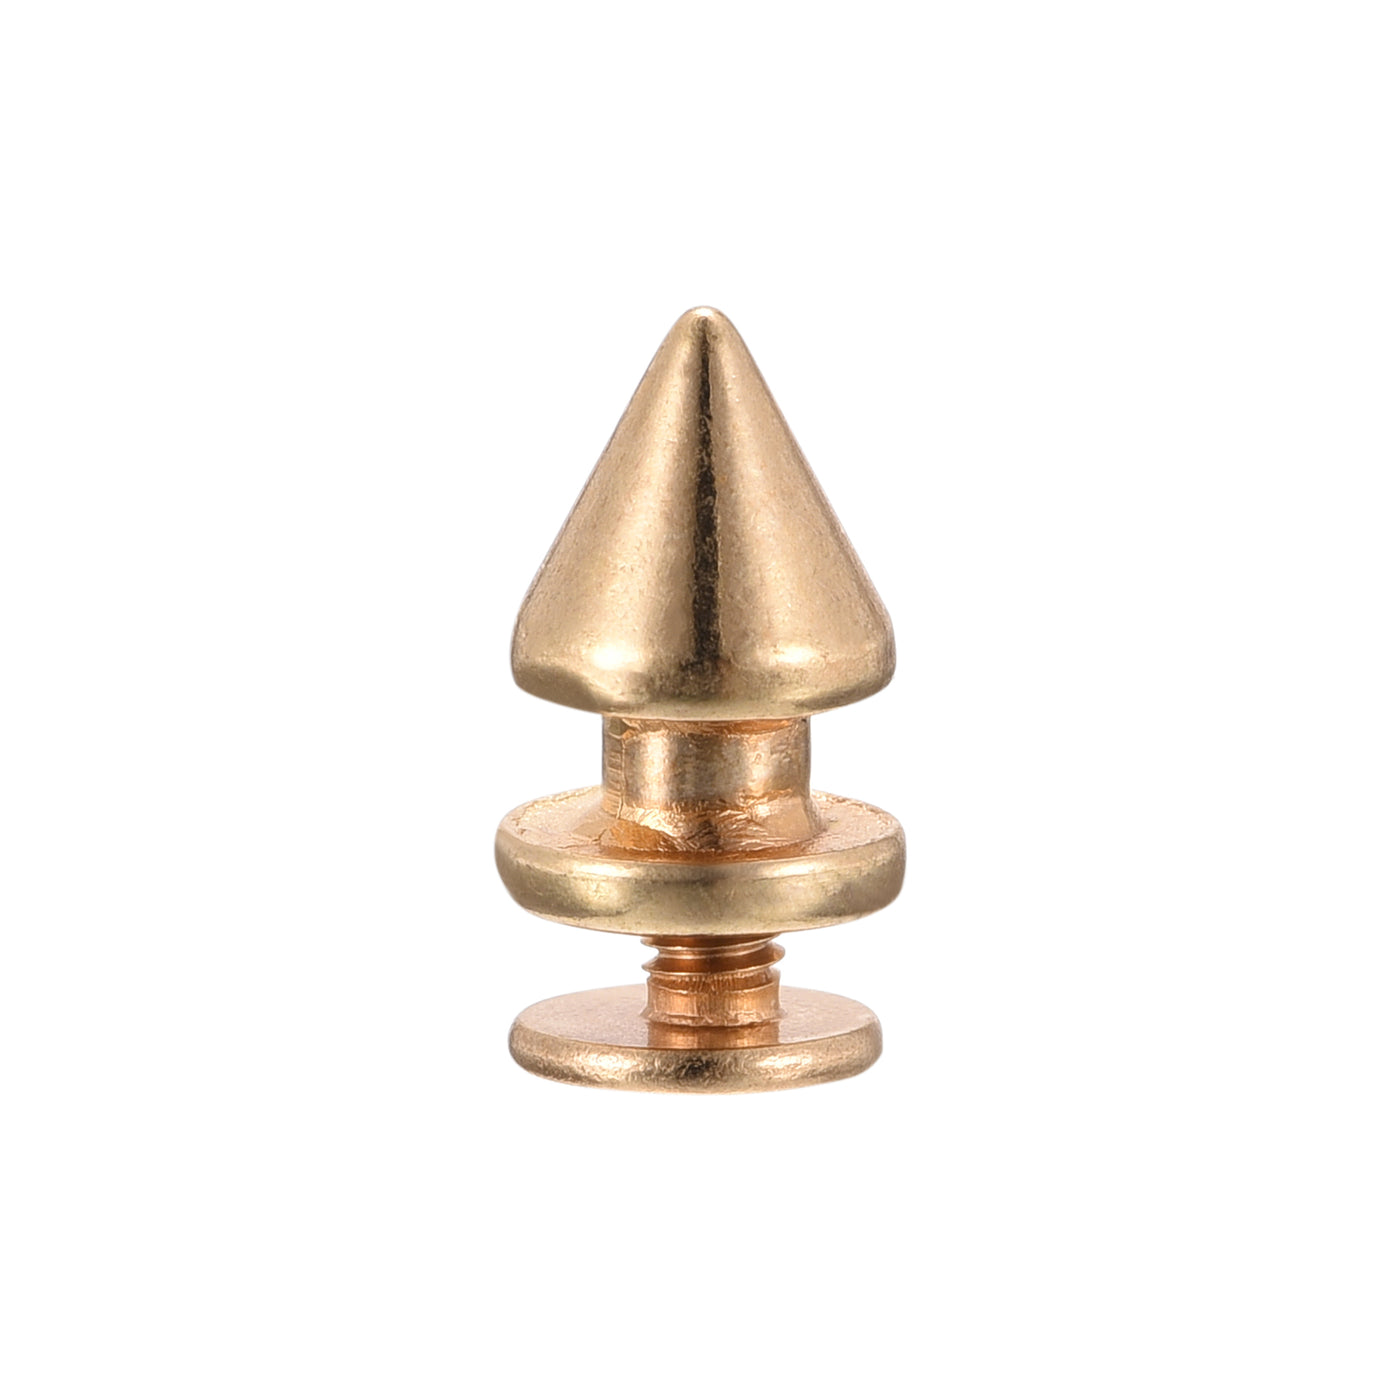 Uxcell Uxcell 8x12mm Screw Back Stud Rivets Spikes Zinc Alloy for DIY Gold Tone 100 Sets